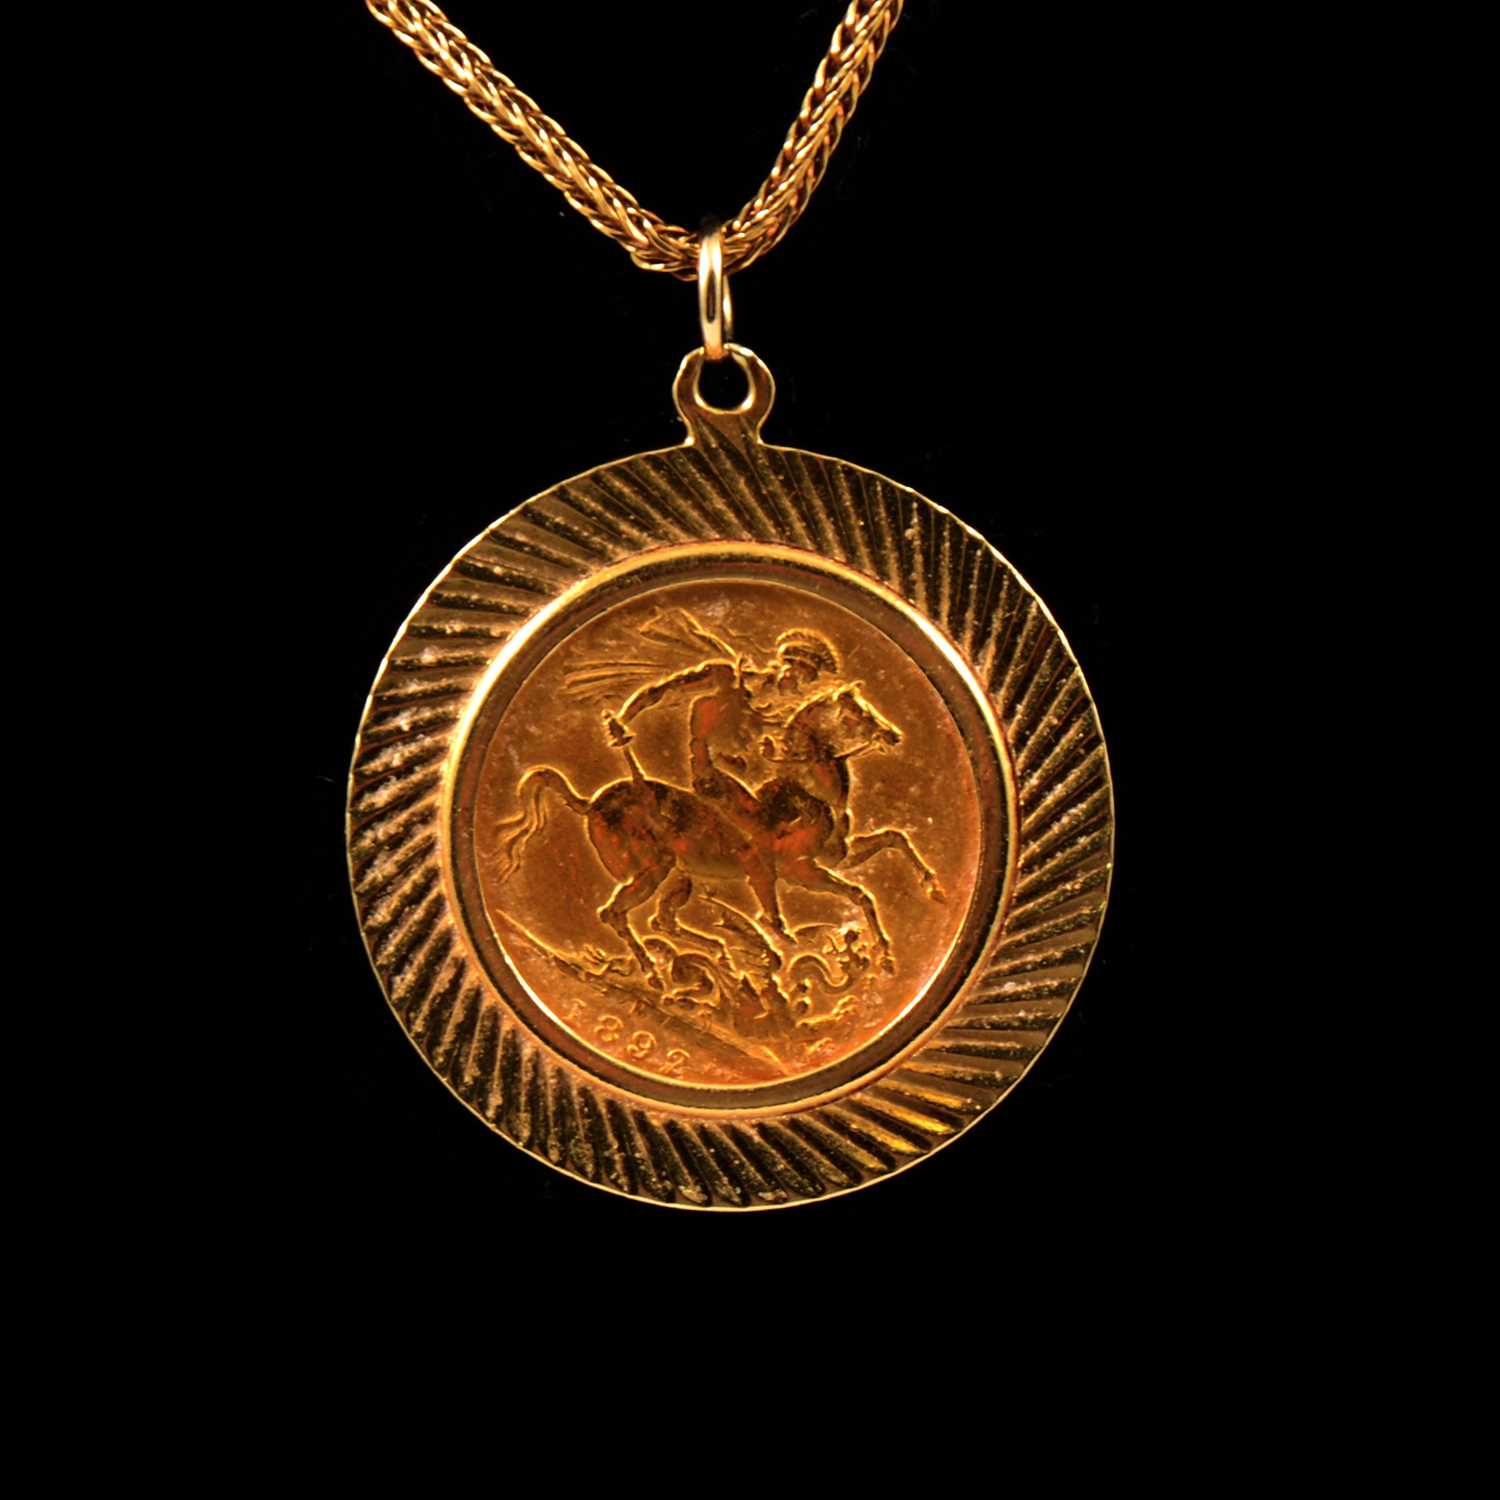 Lot 87 - A Gold Full Sovereign pendant and chain.